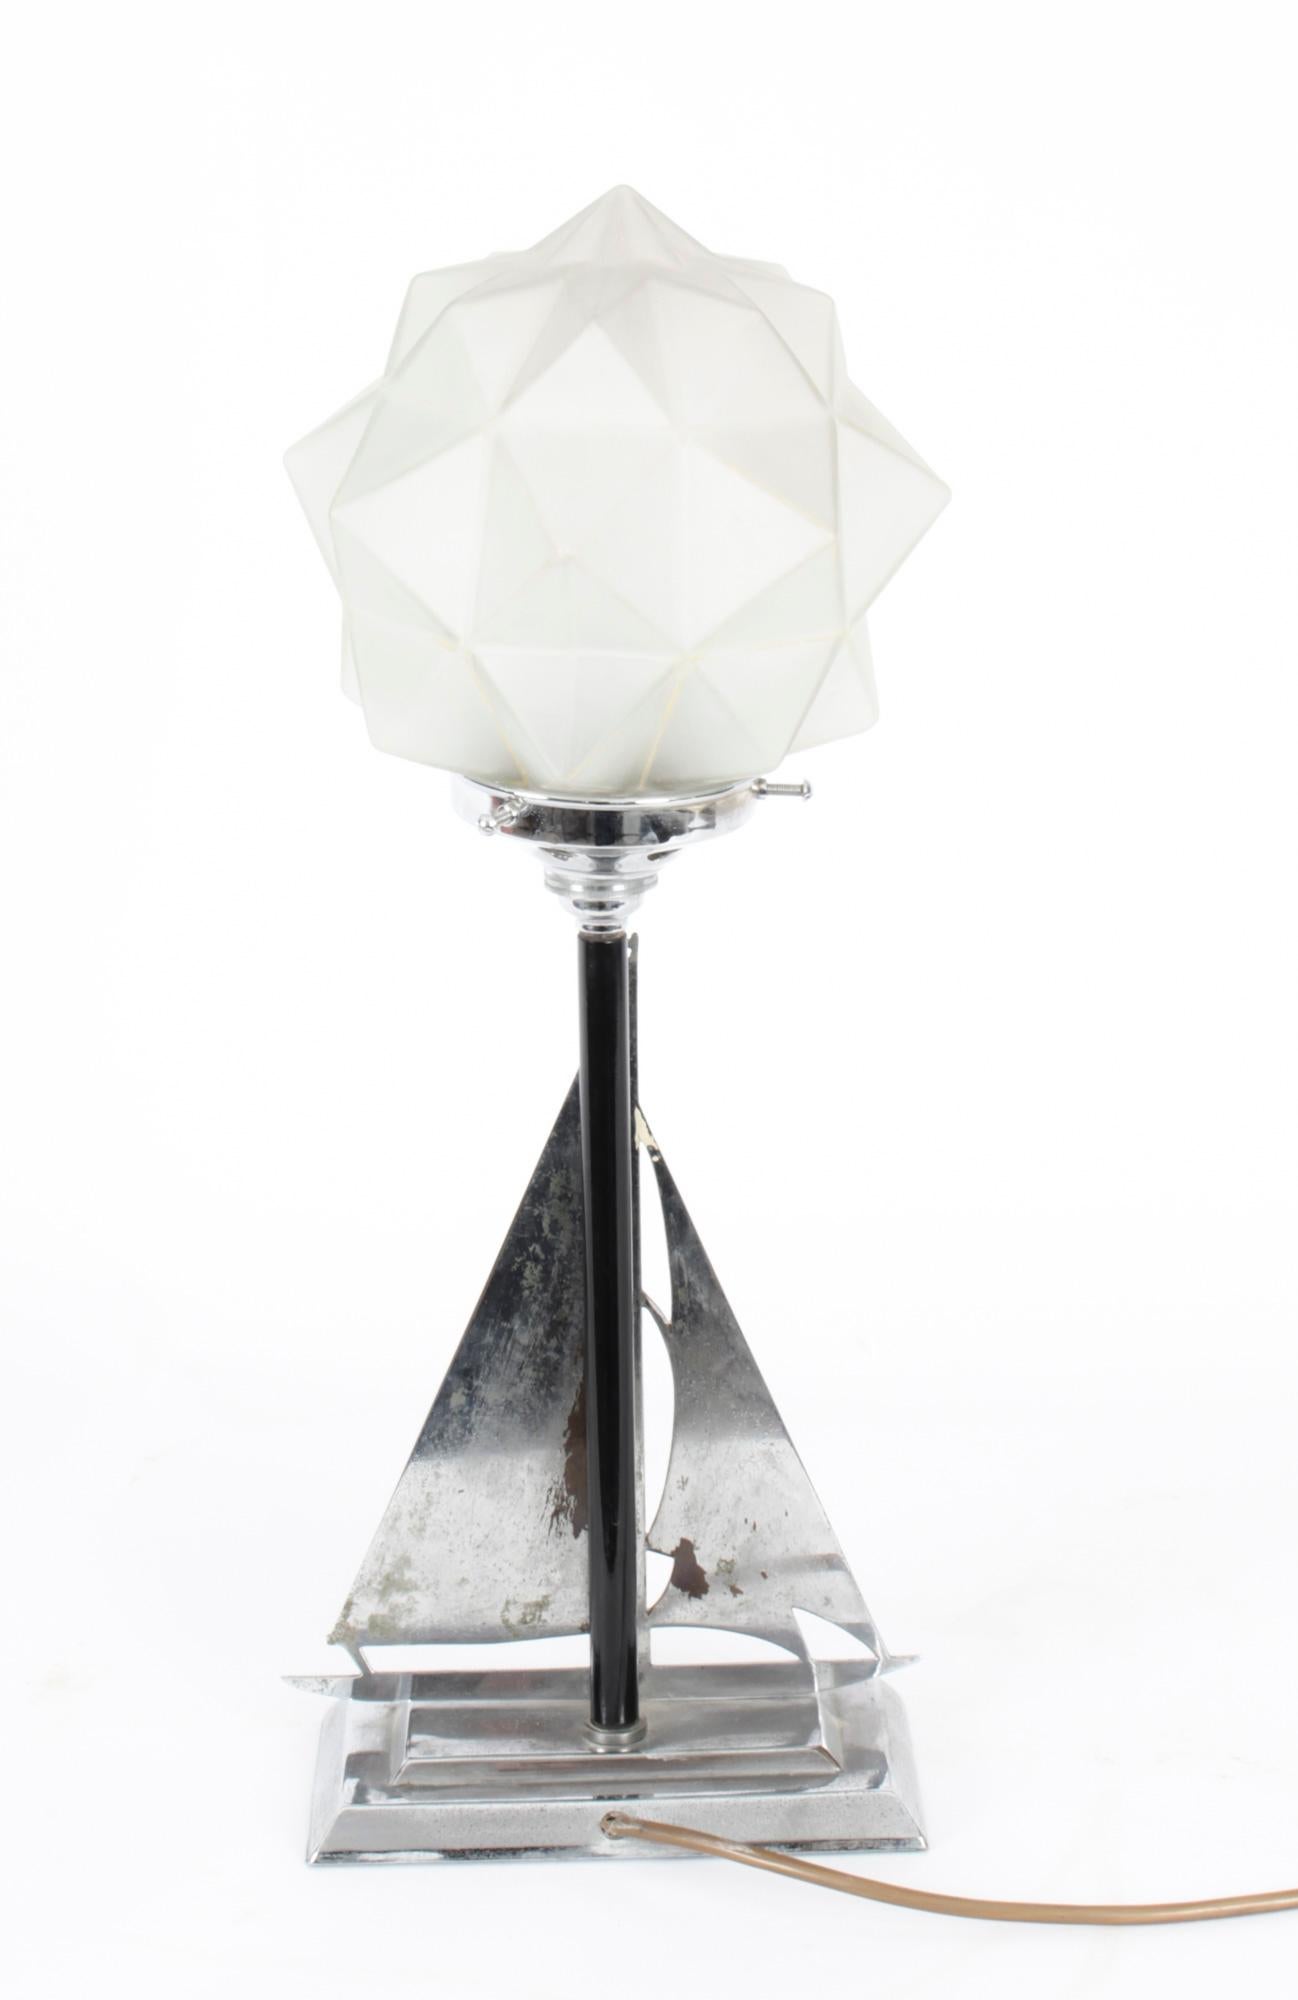 Antique Art Deco Chrome Sail Yacht Lamp, 1920s In Good Condition For Sale In London, GB